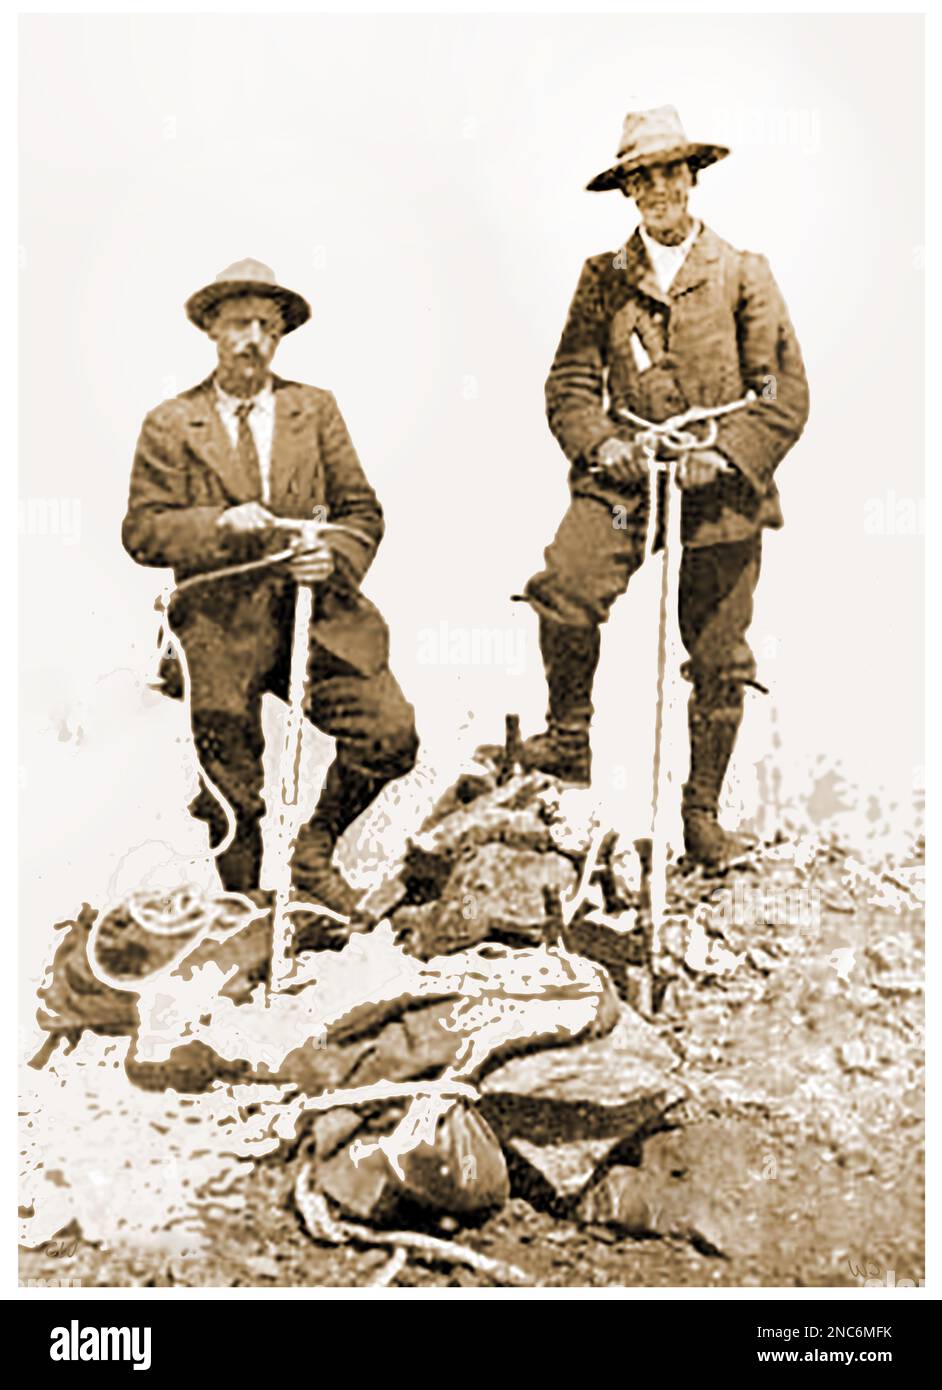 An old photo of F Ormiston- Smith and guide Christian Bergner on the summit of the Wetterhorn in 1905.  Frank Ormiston-Smith was accompanied by the guide Christian Bergner  == Ein altes Foto von F. Ormiston-Smith und Guide Christian Bergner auf dem Gipfel des Wetterhorns im Jahr 1905.  Frank Ormiston-Smith wurde begleitet von dem Guide Christian Bergner,  == Une vieille photo de F Ormiston-Smith et du guide Christian Bergner au sommet du Wetterhorn en 1905.  Frank Ormiston-Smith était accompagné du guide Christian Bergner. Stock Photo